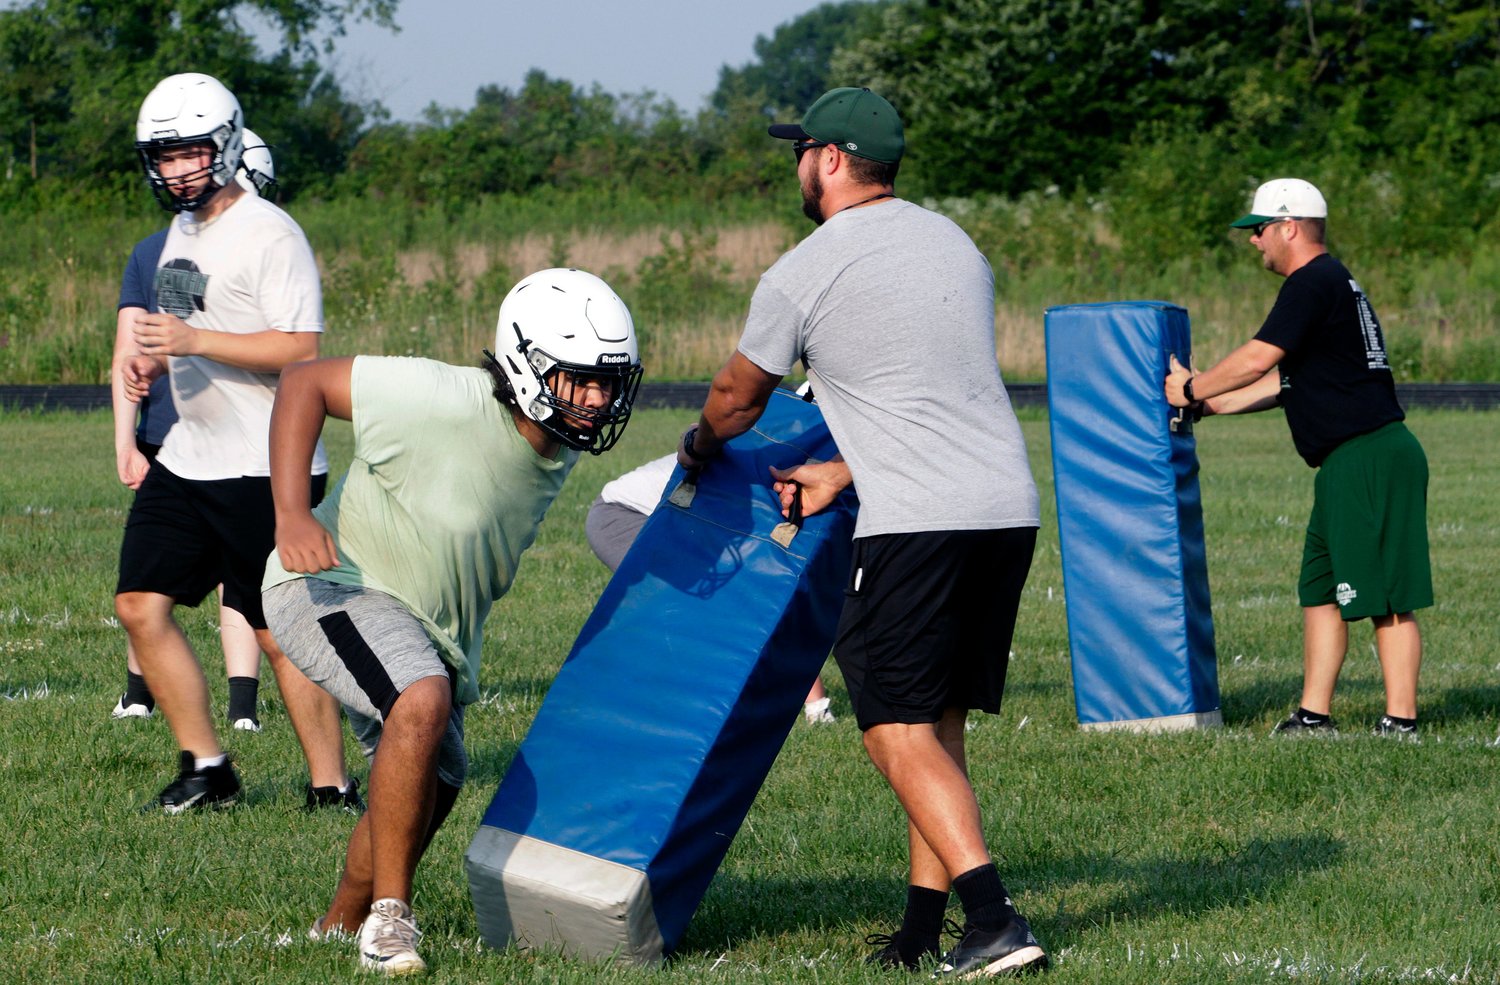 Westran head football coach Aaron O'Laughlin, right, and Hornets assistant coach Alex Thomas hold blocking dummies as they observe players as they work through practice drills. Westran went 9-2 a year ago and opens its 2021 ledger Aug. 27 by making about a 15-mile road trip to battle Lewis &amp; Clark Conference rival Salisbury.